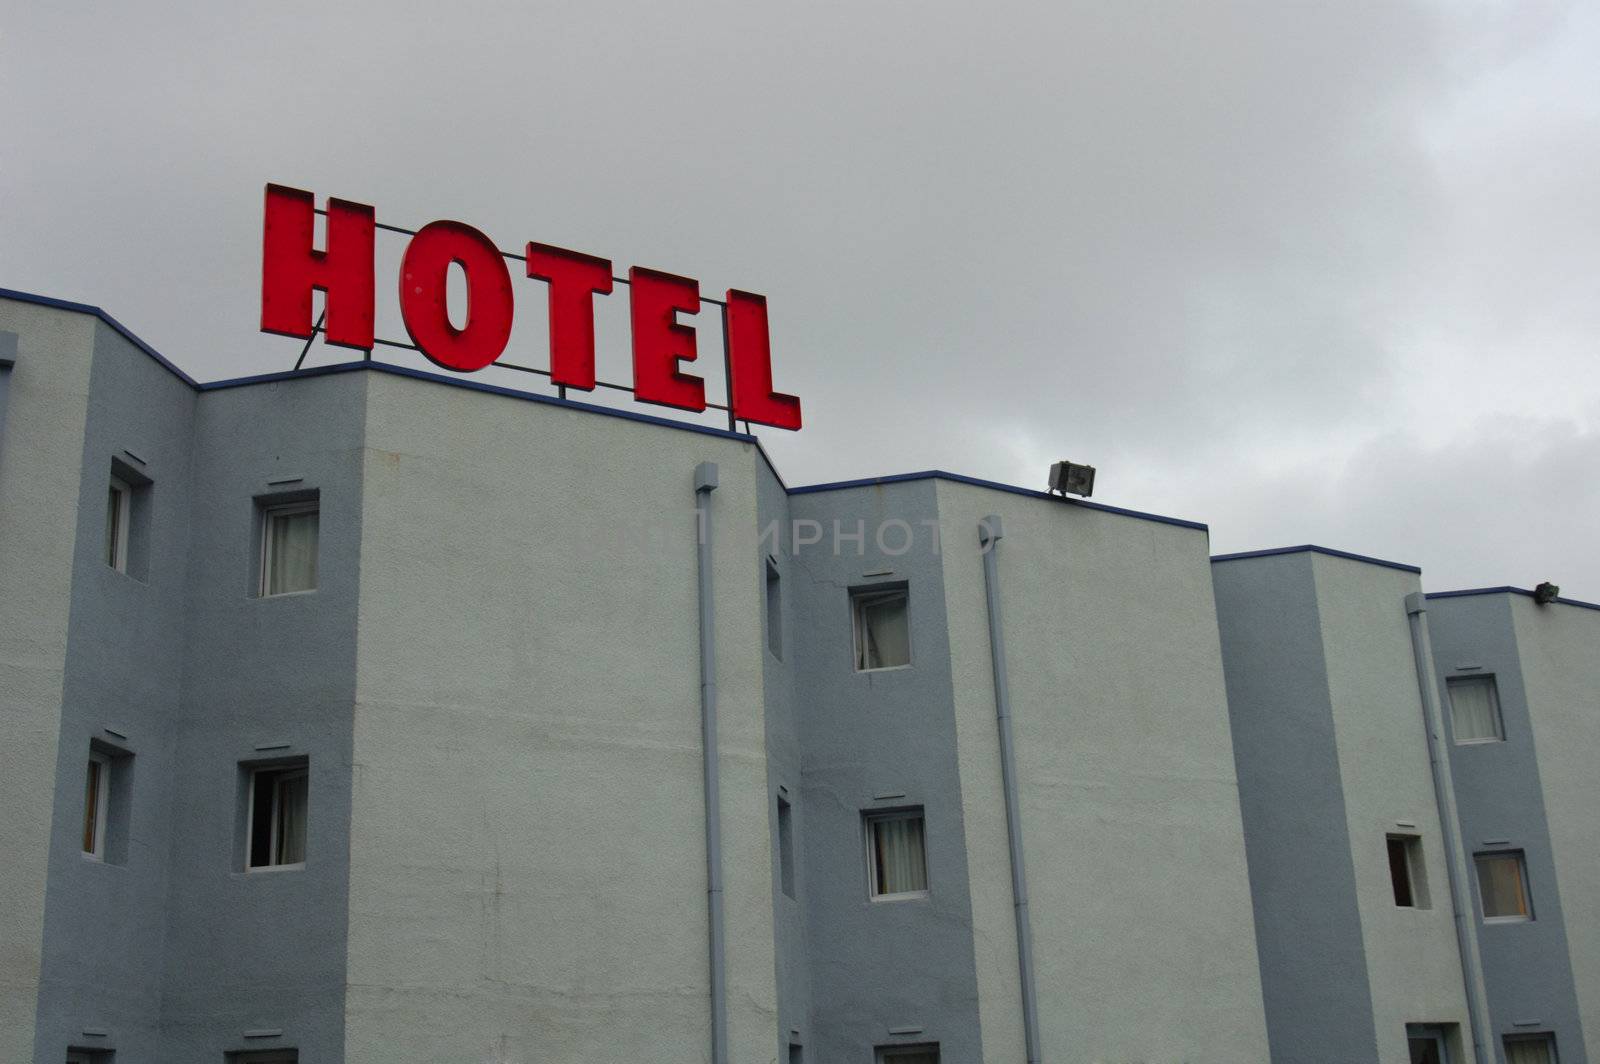 Grey walls, tiny windows, blocky architecture, all under a grey sky. The only bright thing about this hotel is its sign. Space for text in the sky.